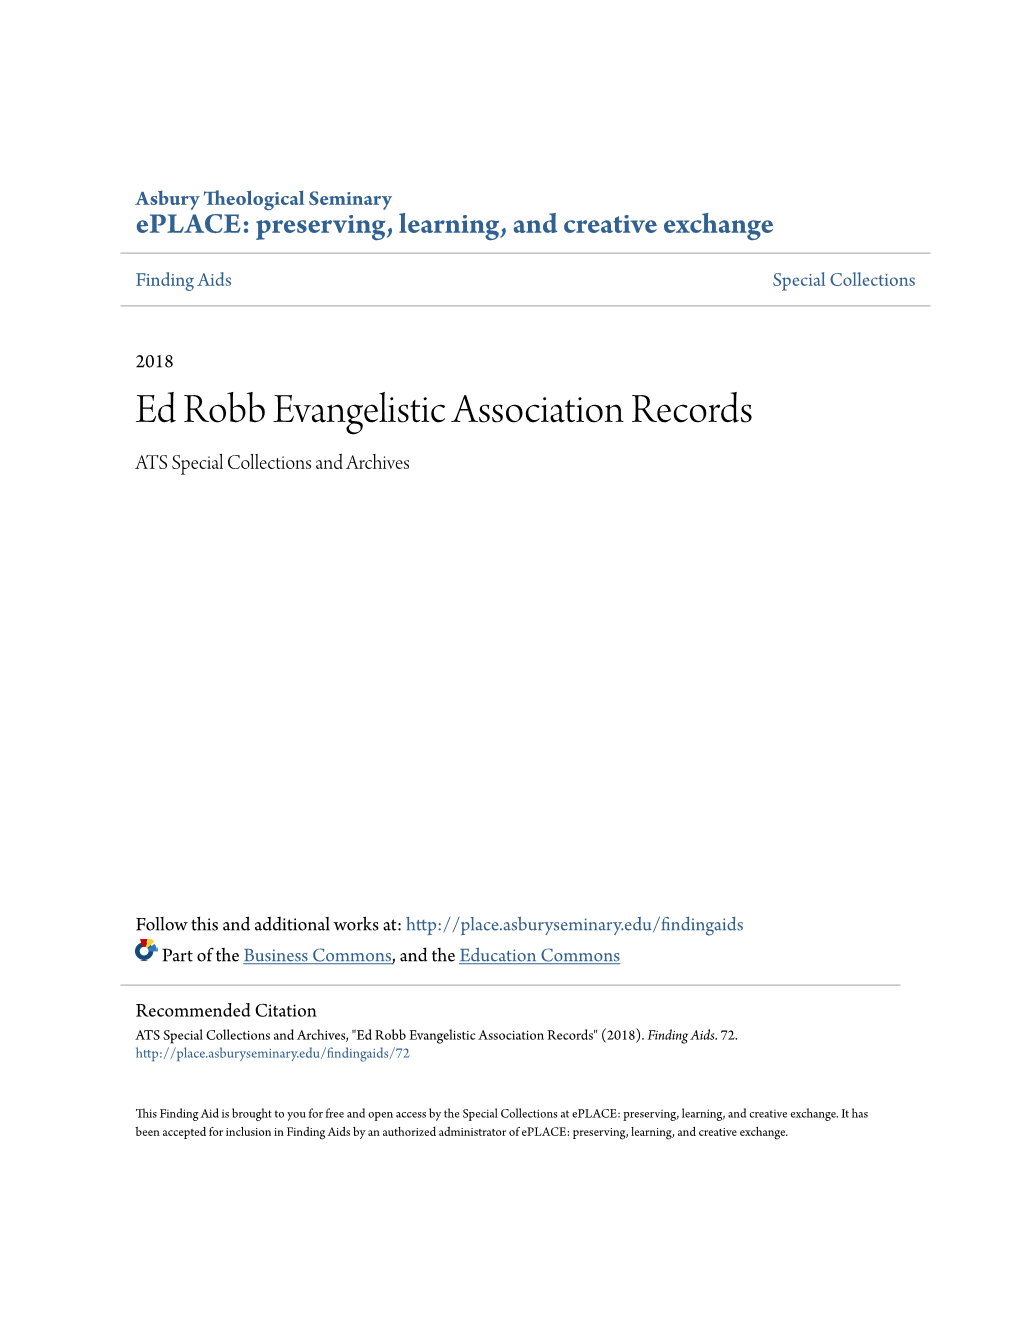 Ed Robb Evangelistic Association Records ATS Special Collections and Archives